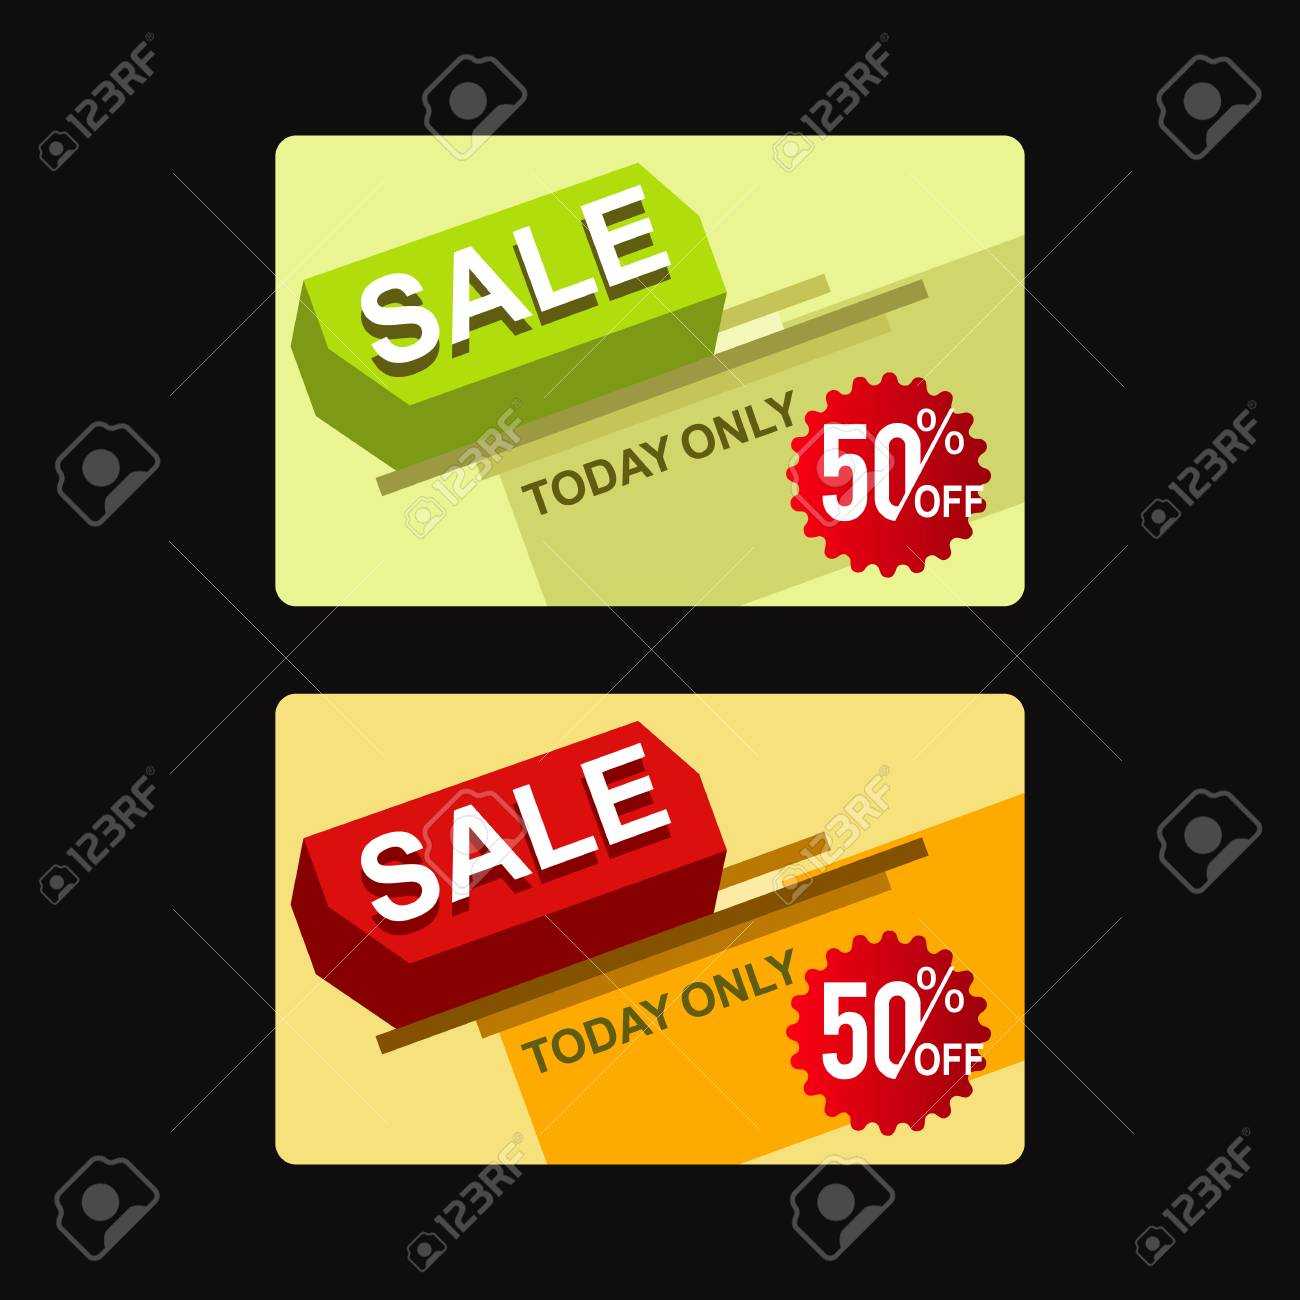 Sale 50 Card Design Vector Template In Credit Card Templates For Sale